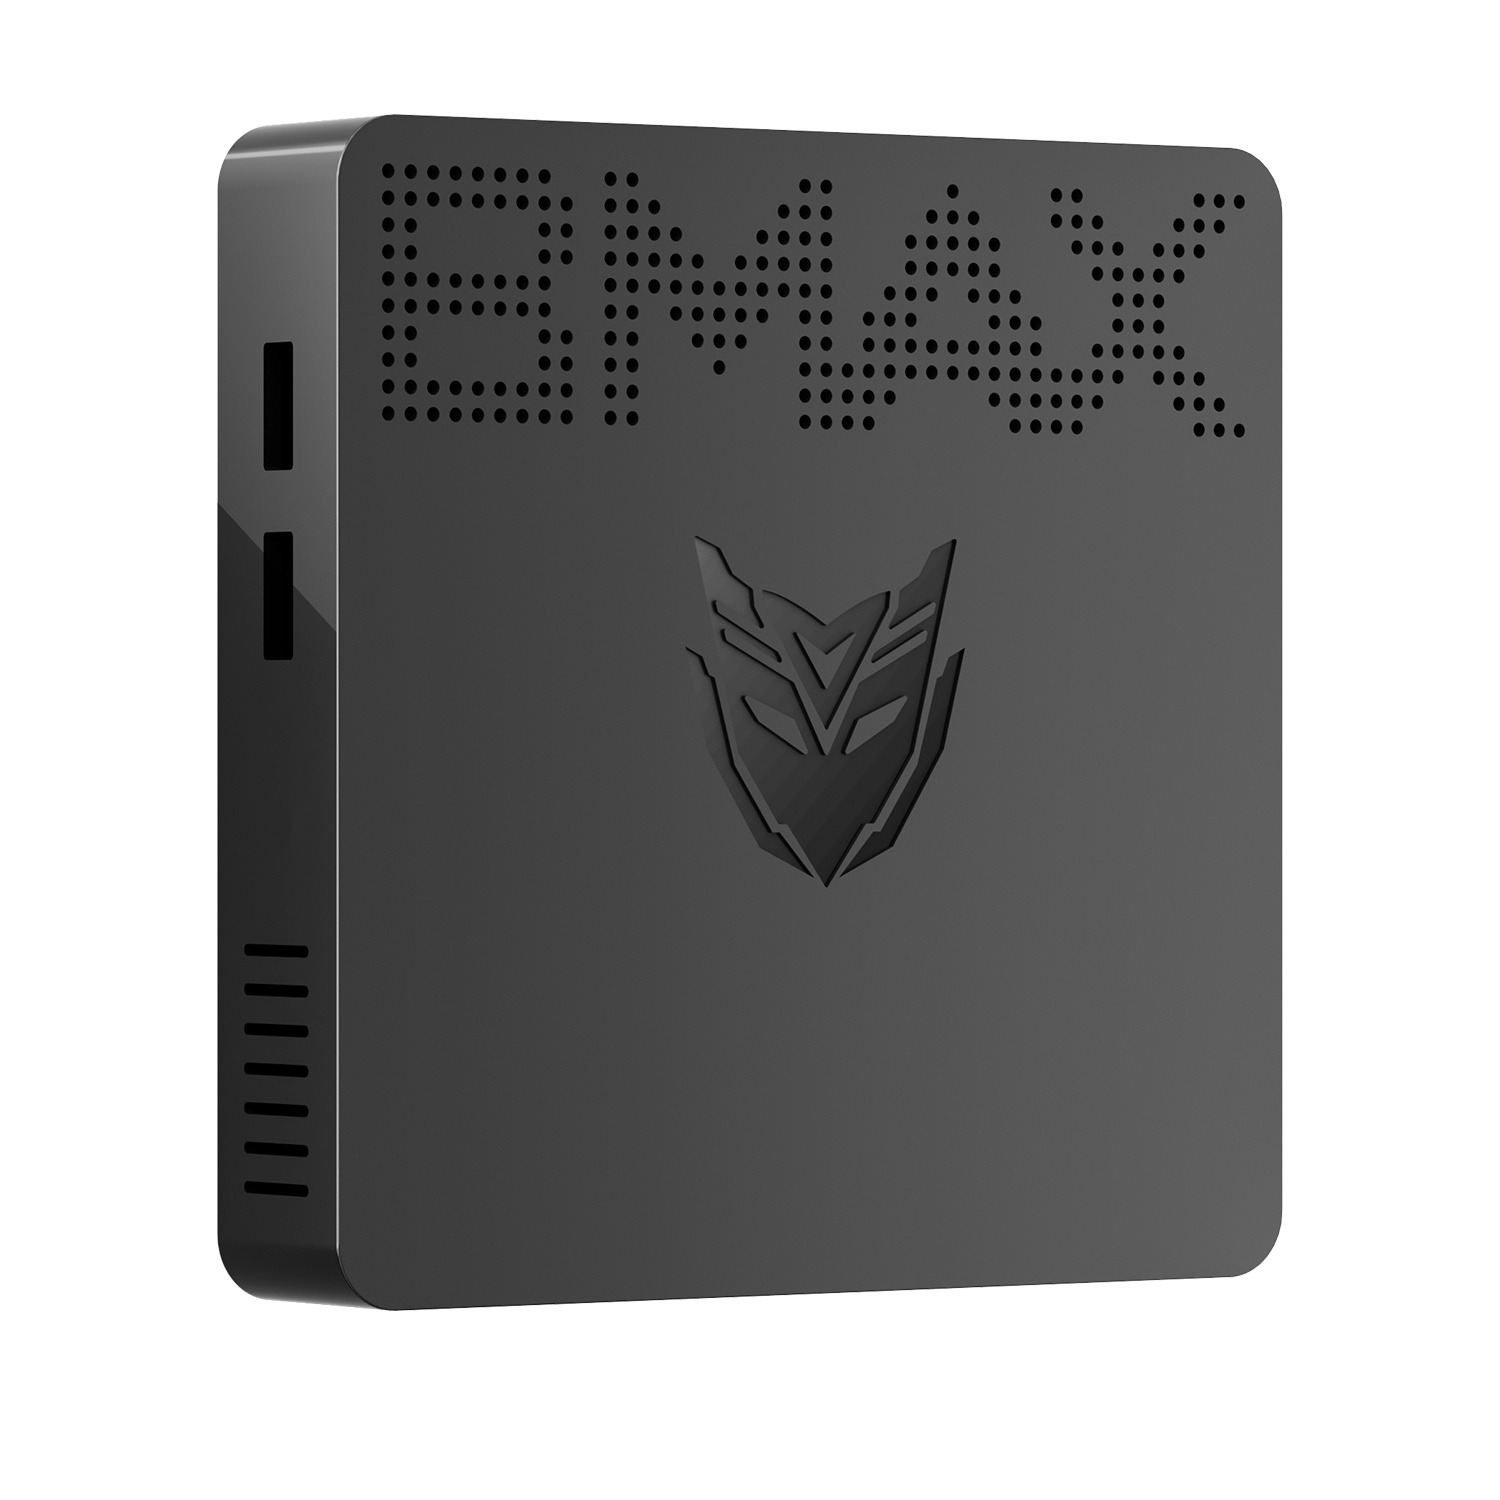 Find Bmax B1 Mini PC Intel Celeron J3060/N3060 Dual Core 1 6GHz up to 2 4GHz 4GB LPDDR3 64GB eMMC Intel HD Graphics Wifi bluetooth M 2 SATA 12V/2A HD VGA for Sale on Gipsybee.com with cryptocurrencies